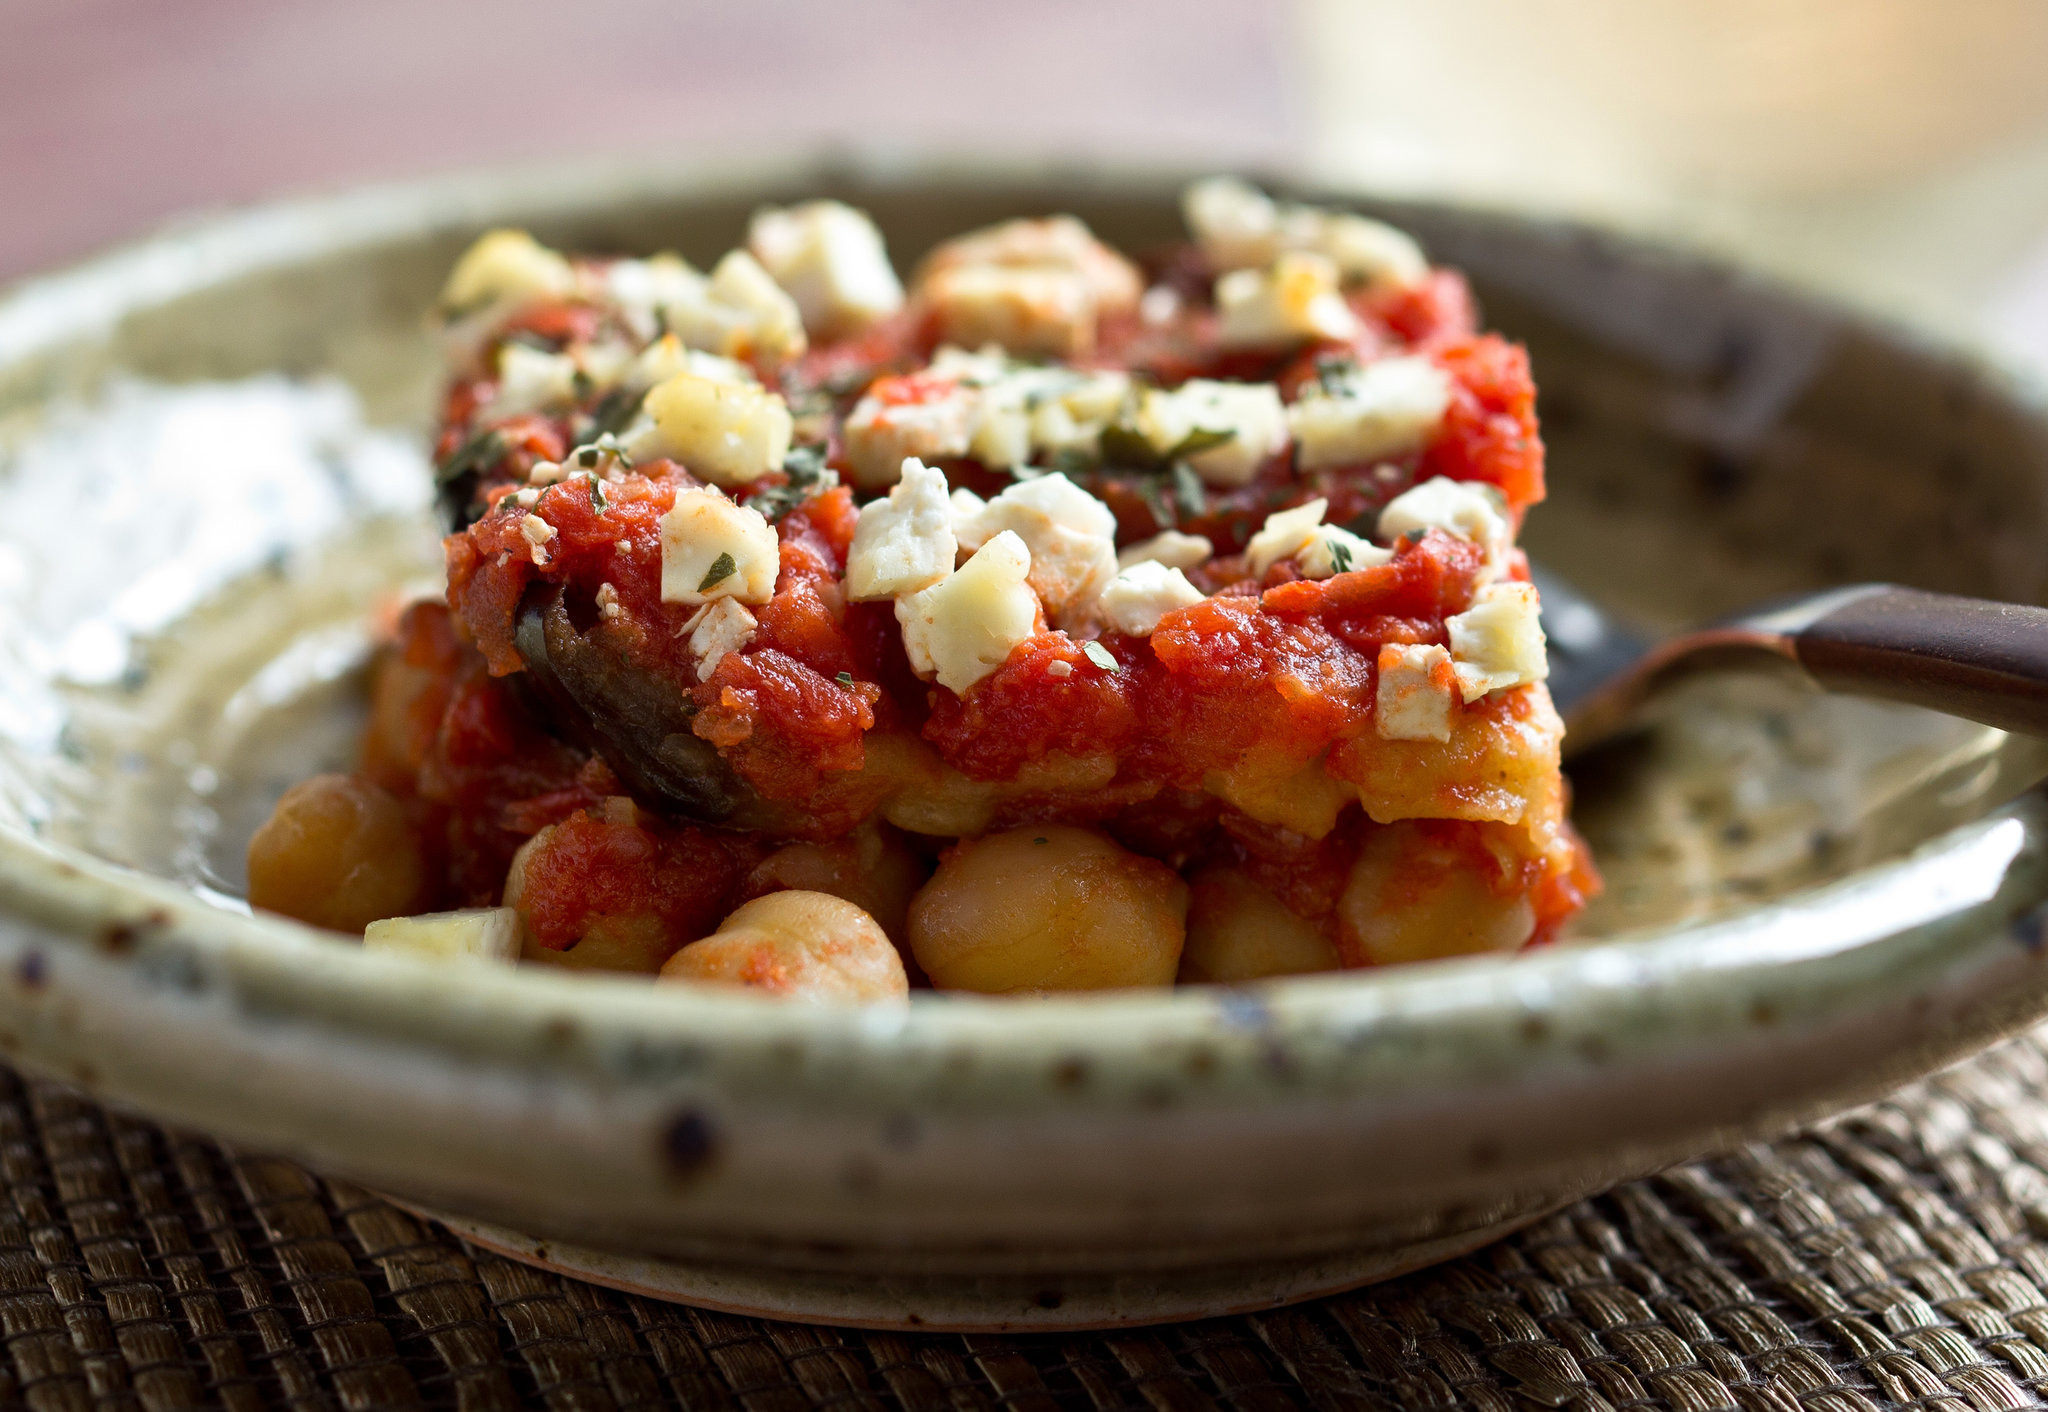 Is Eggplant Healthy
 Roasted Eggplant and Chickpeas With Tomato Sauce Recipe